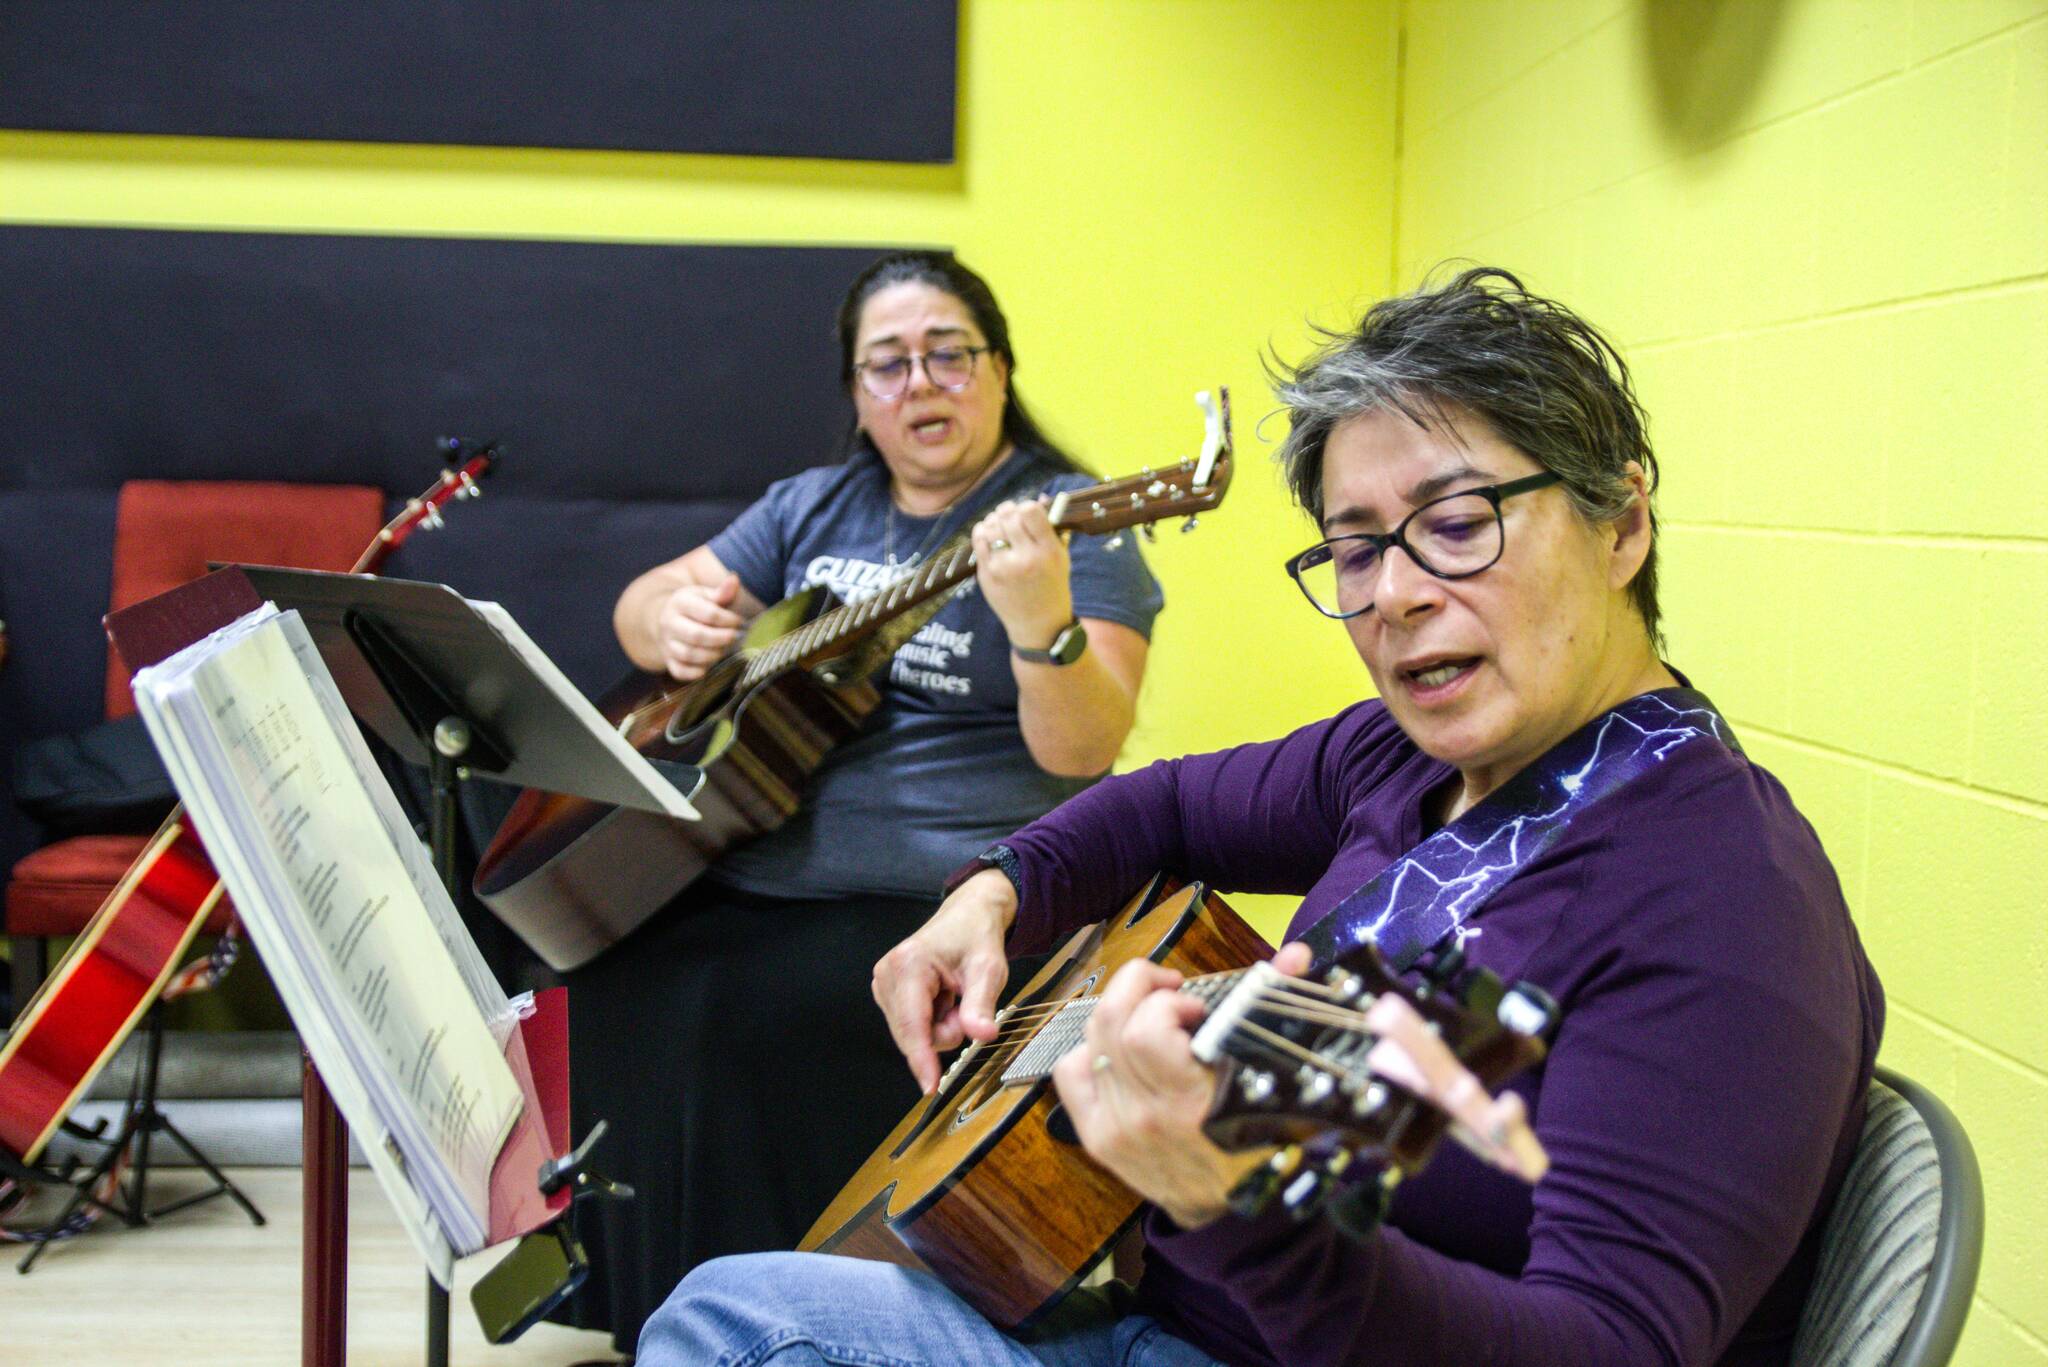 Right to left, Candy O’Neal and Melissa Johnson play at the Guitars for Vets Sunday Jam. (Photo by Luisa Loi)